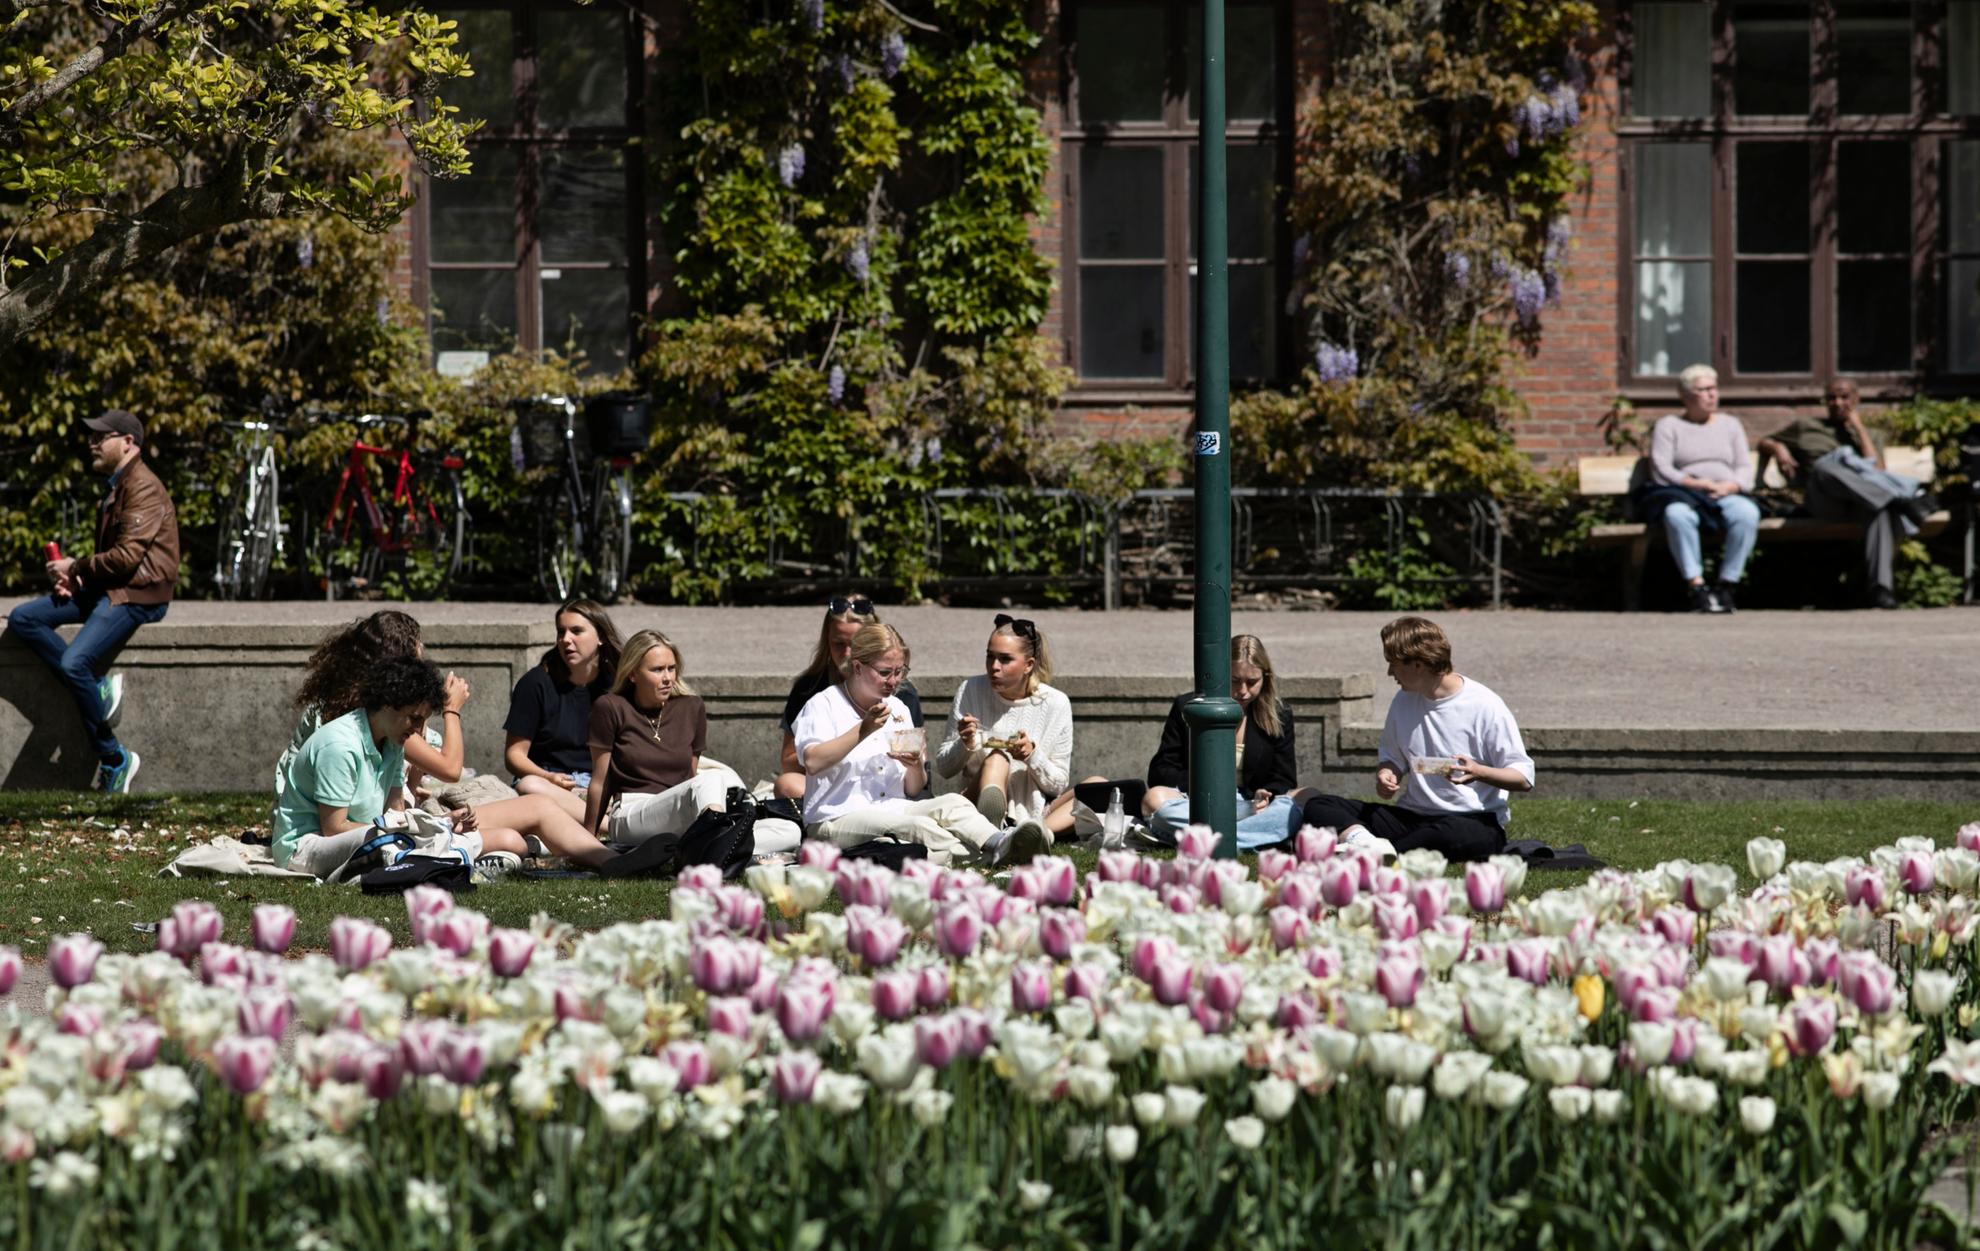 Students sits in the grass during a sunny summer day.